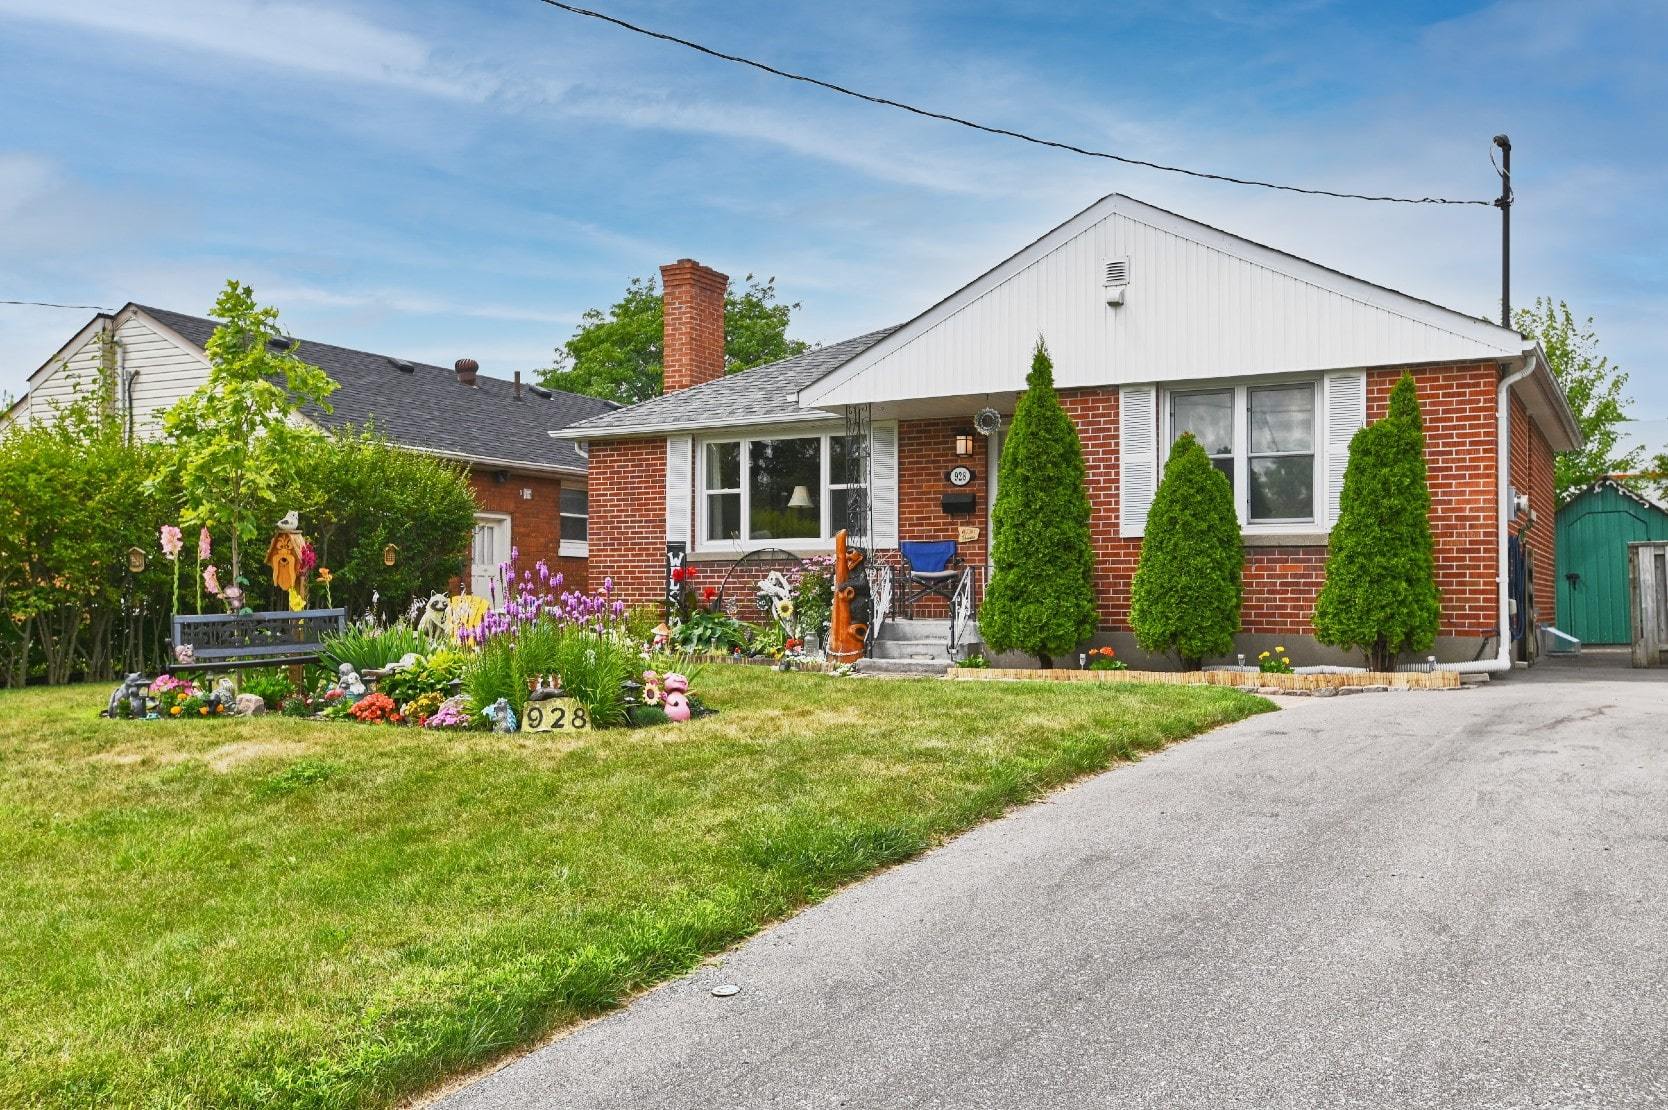 Brick bungalow with a beautiful front lawn in Oshawa, Ontario